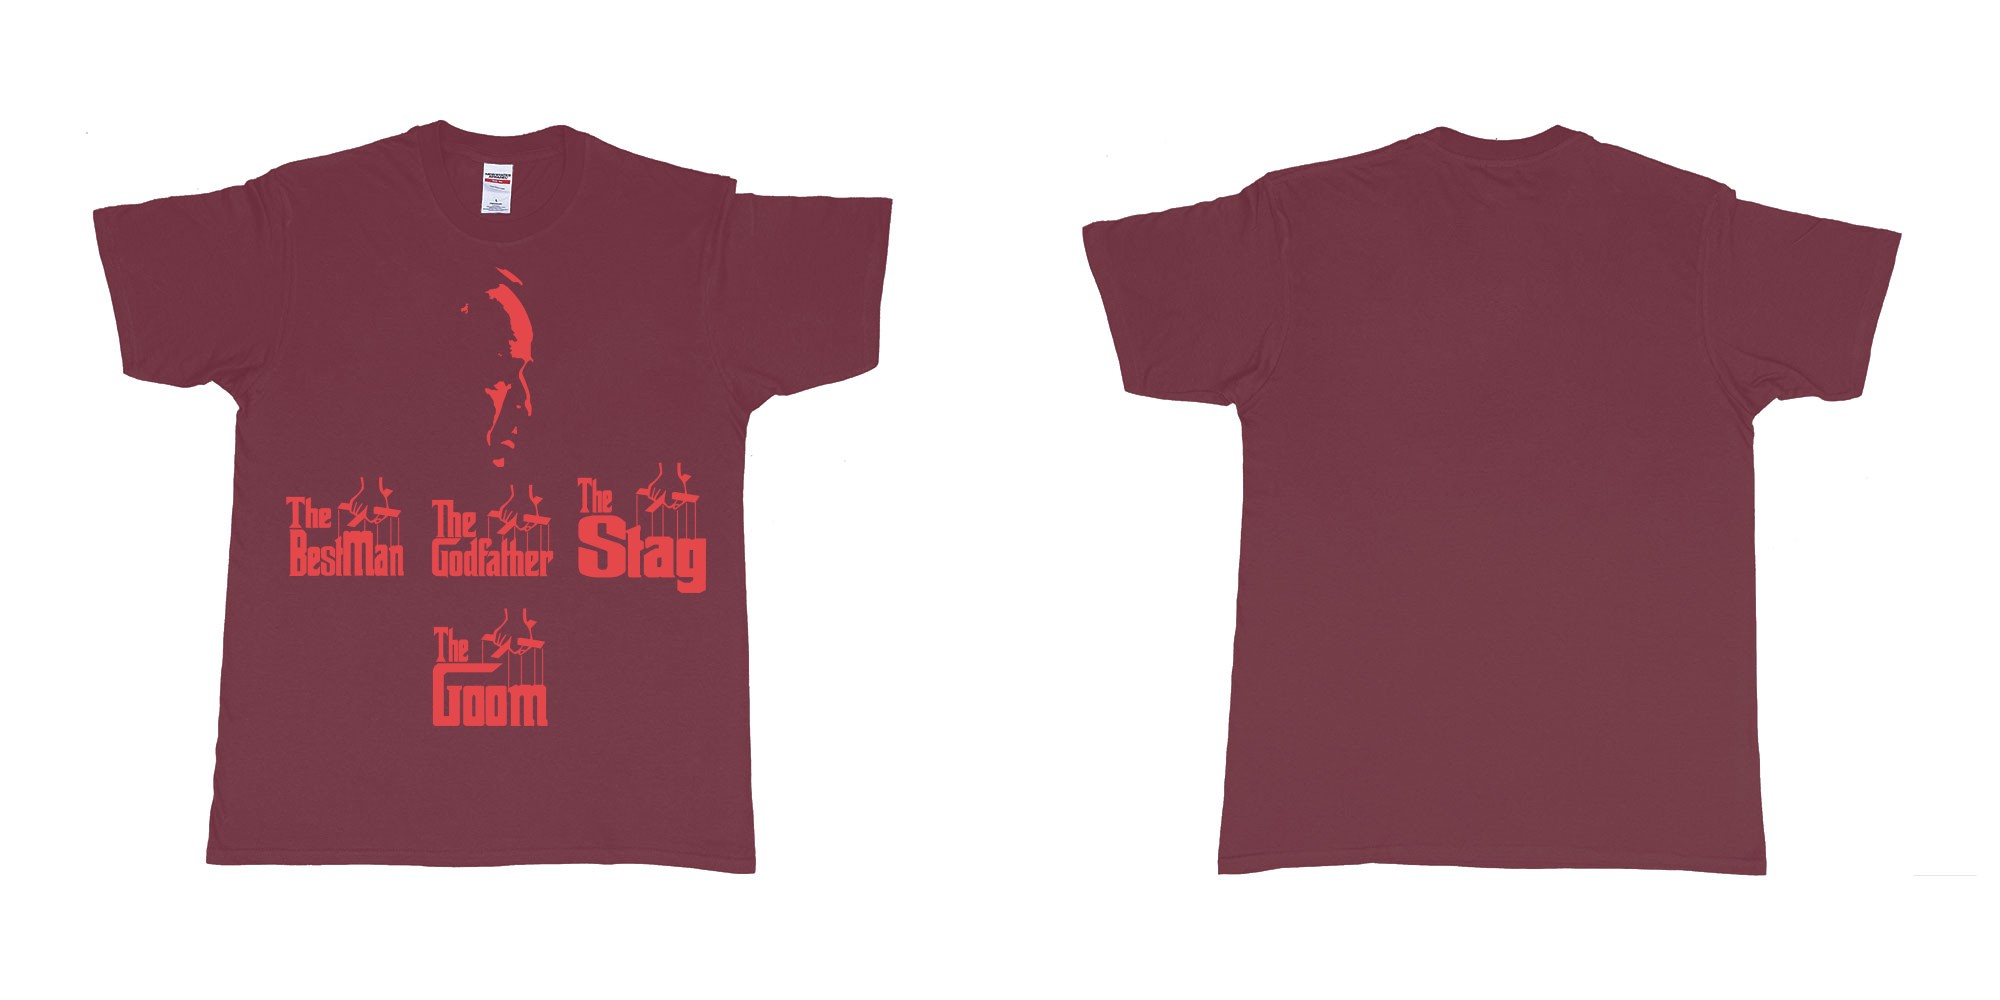 Custom tshirt design TPW the godfather in fabric color marron choice your own text made in Bali by The Pirate Way